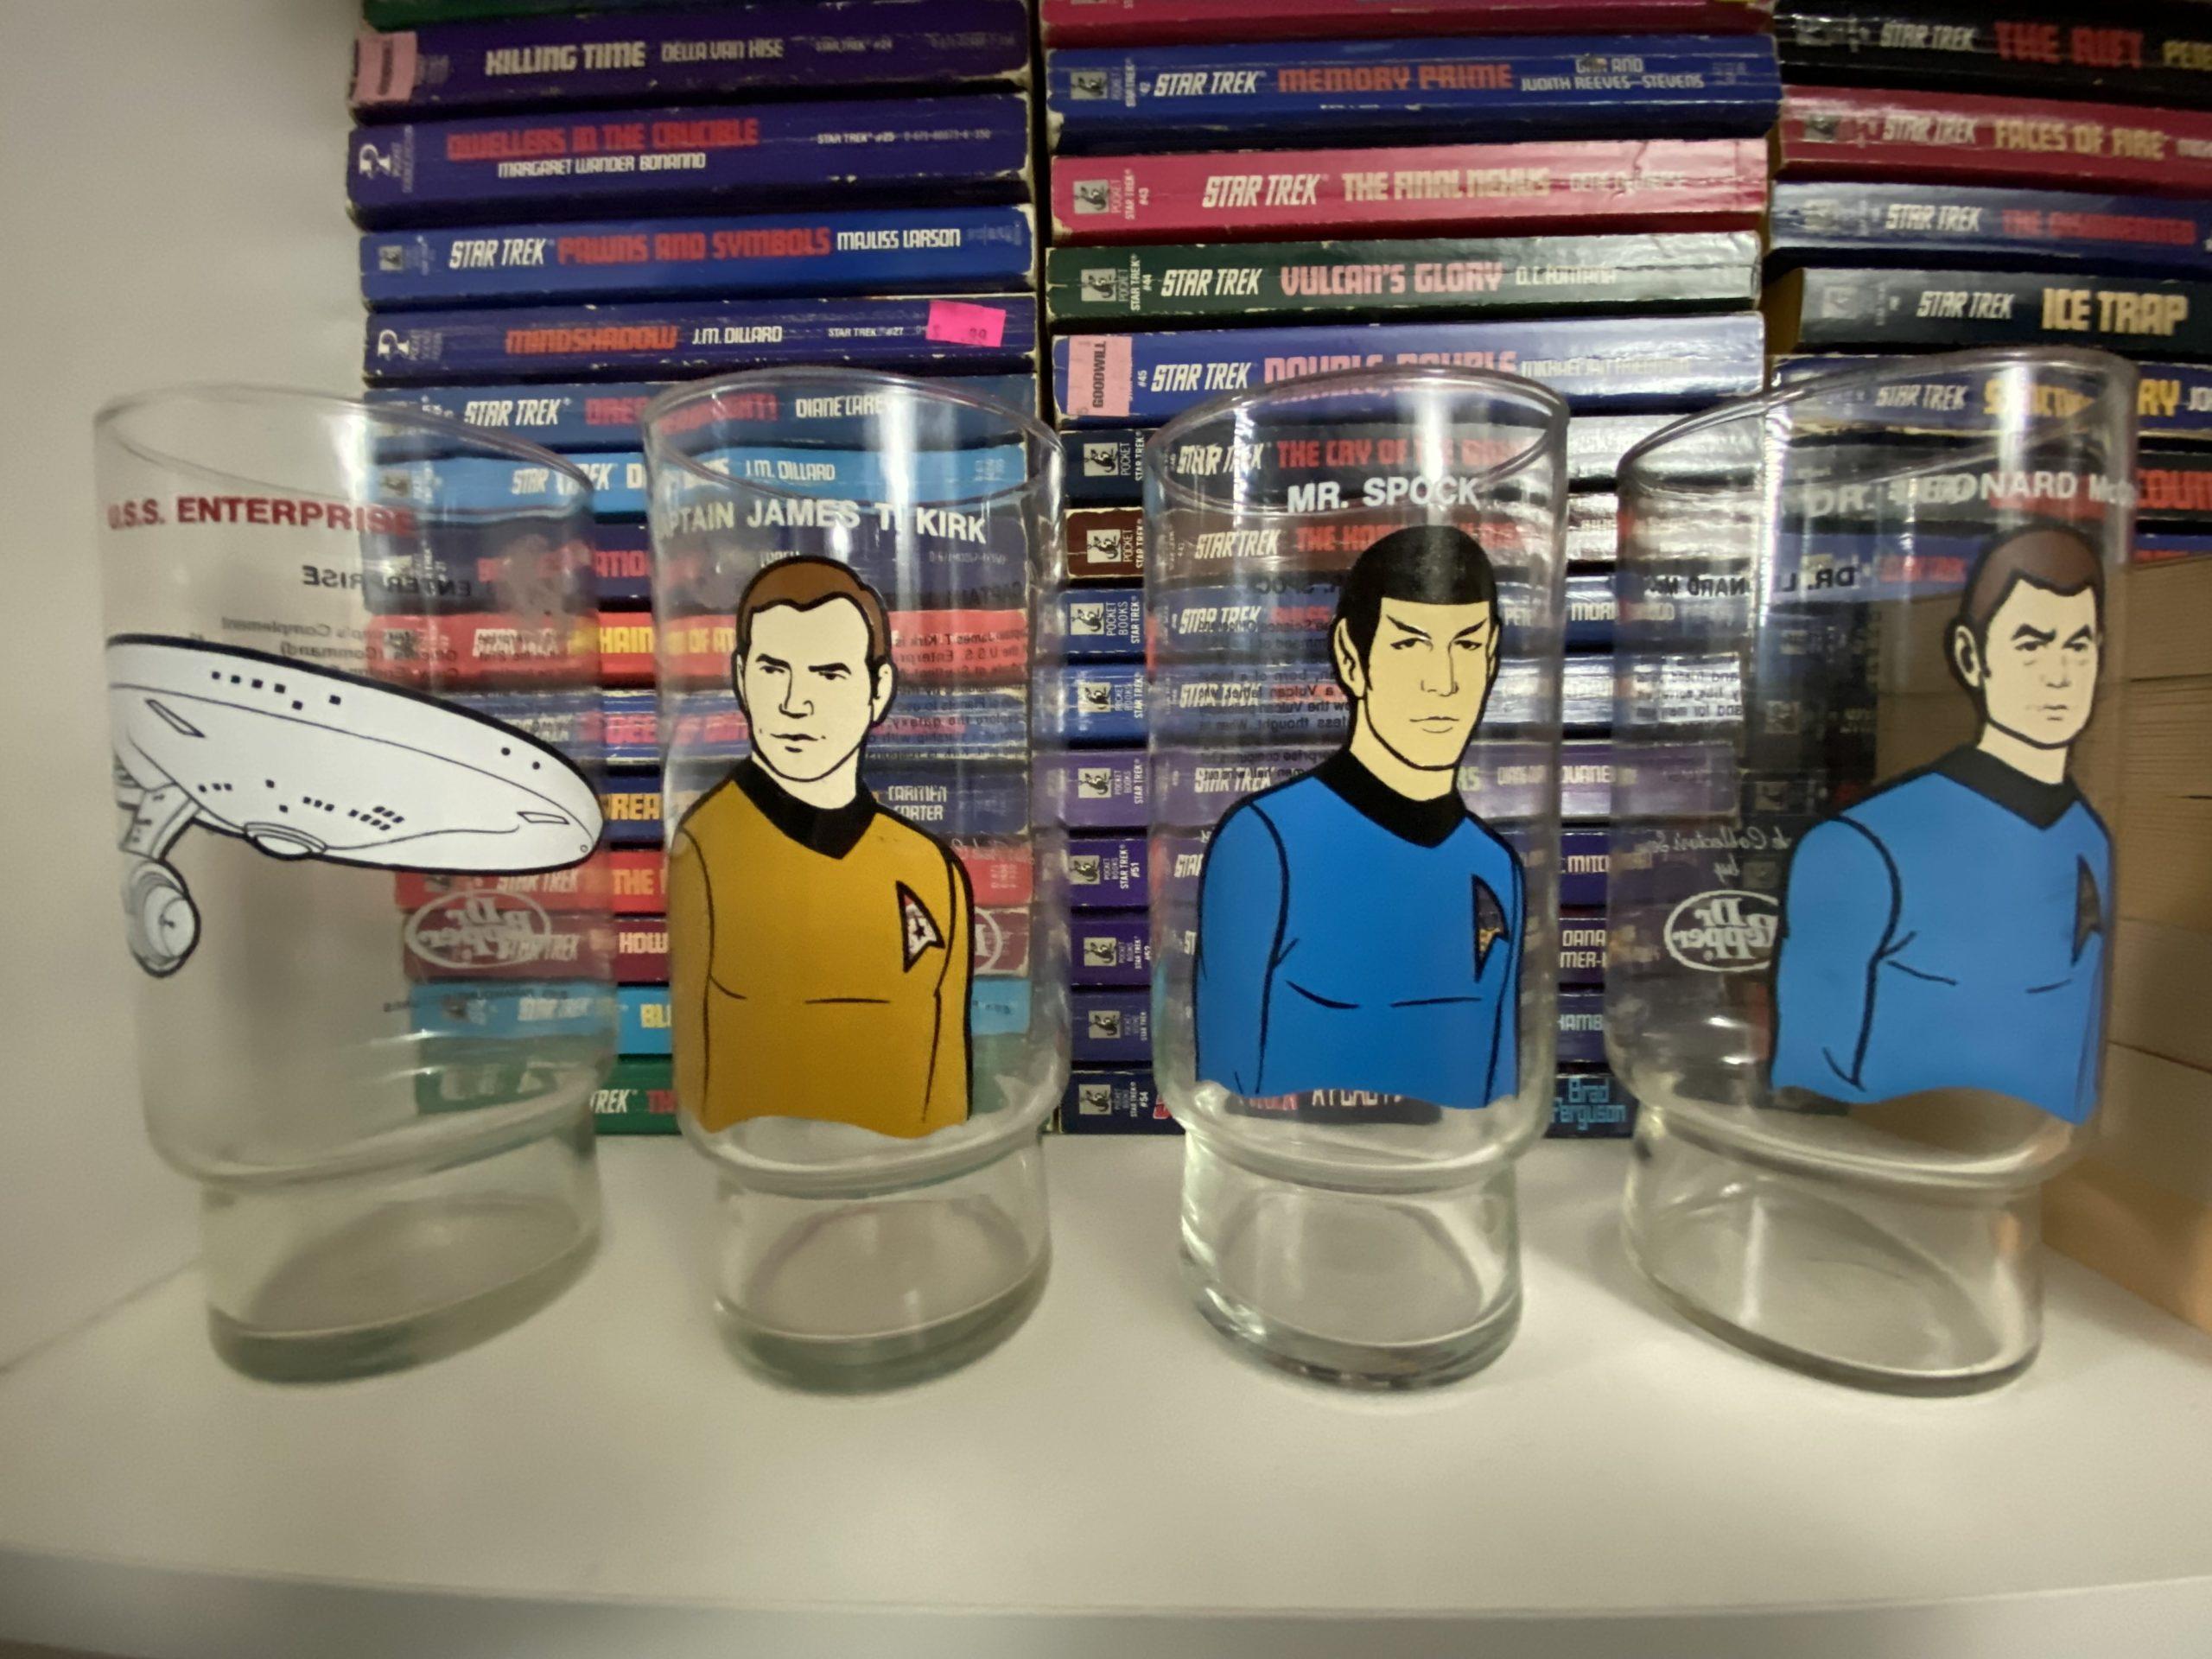 Four drinking glases sitting on a bookshelf in front of a stack of TOS Star Trek novels. TAS artwork on the glasses shows the Enterprise, Kirk, Spock, and McCoy.